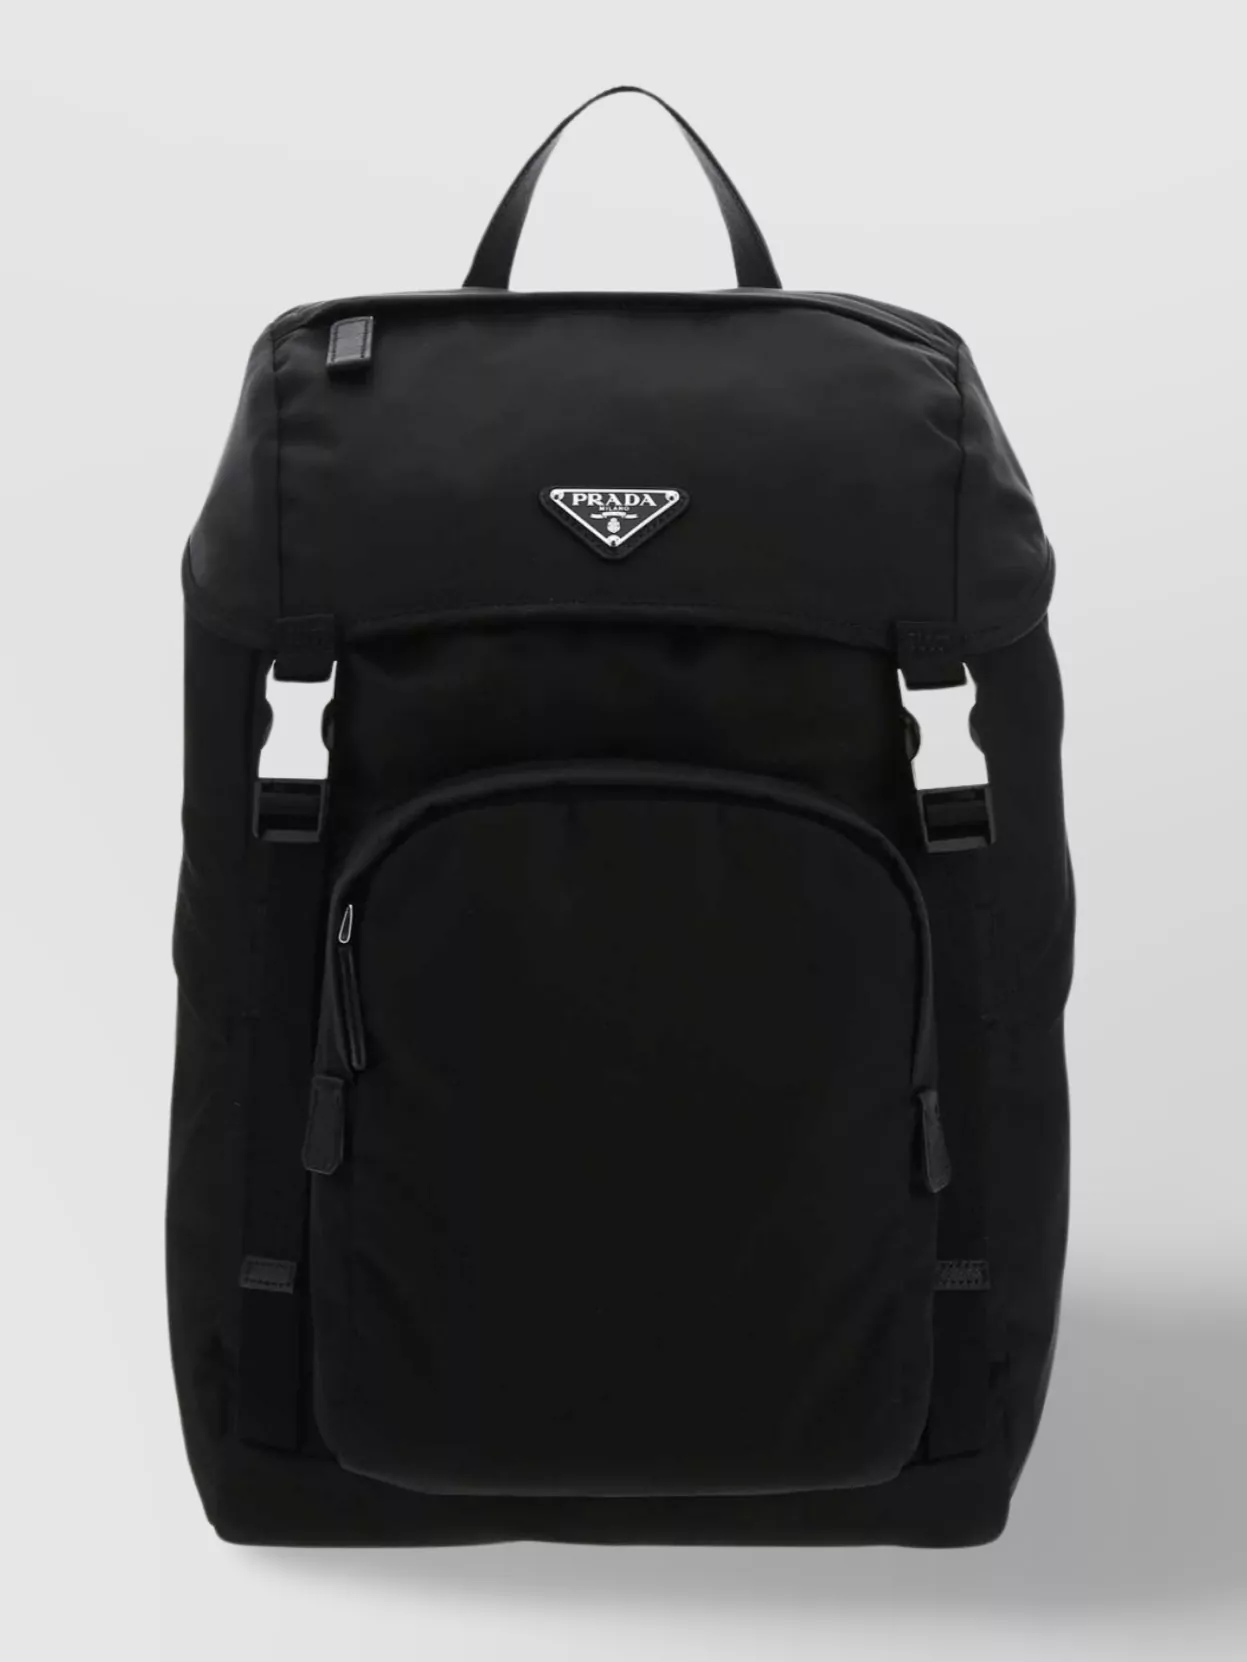 Shop Prada Nylon Backpack With Adjustable Straps And Pockets